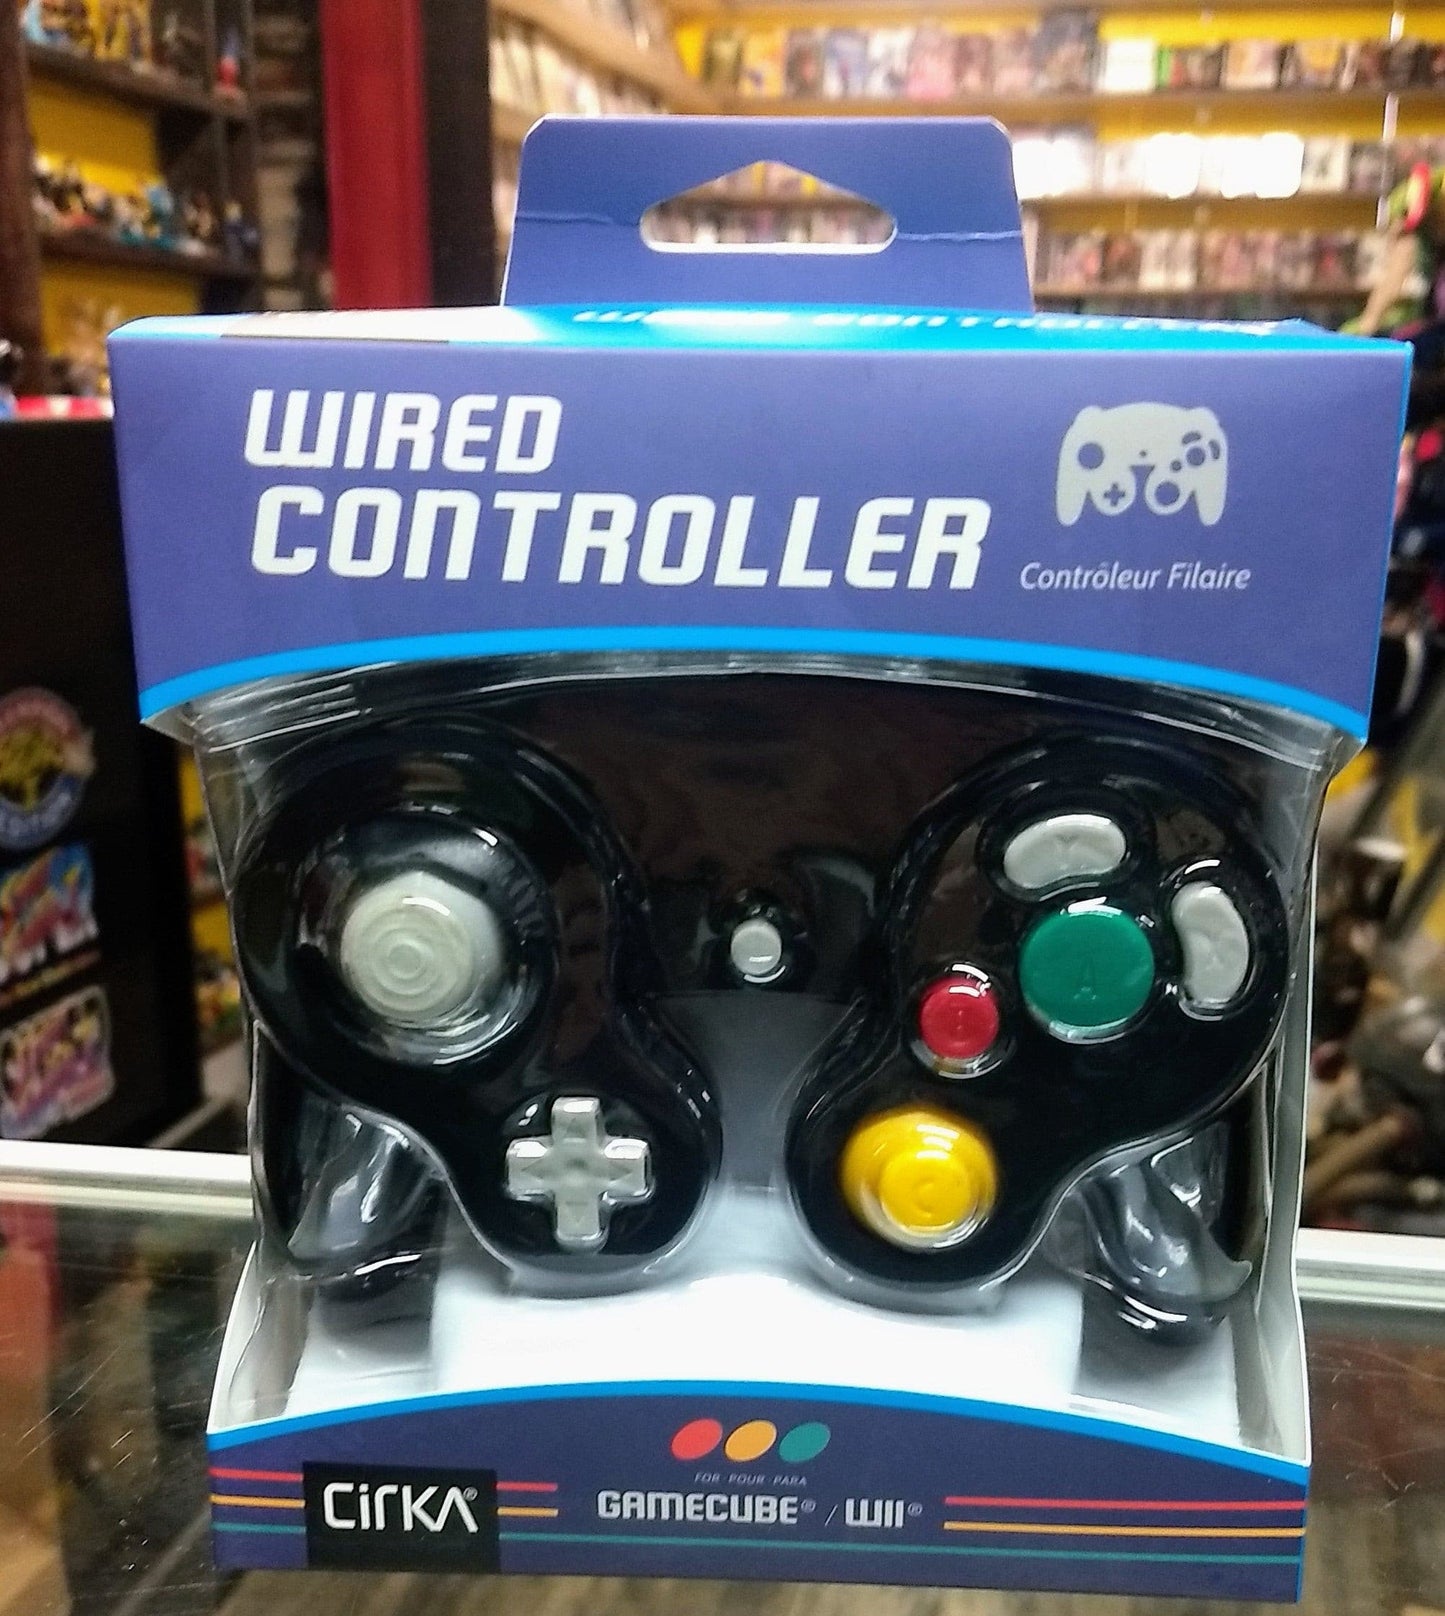 MANETTE AVEC FIL NINTENDO GAMECUBE NGC WII WIRED CONTROLLER CIRKA - jeux video game-x